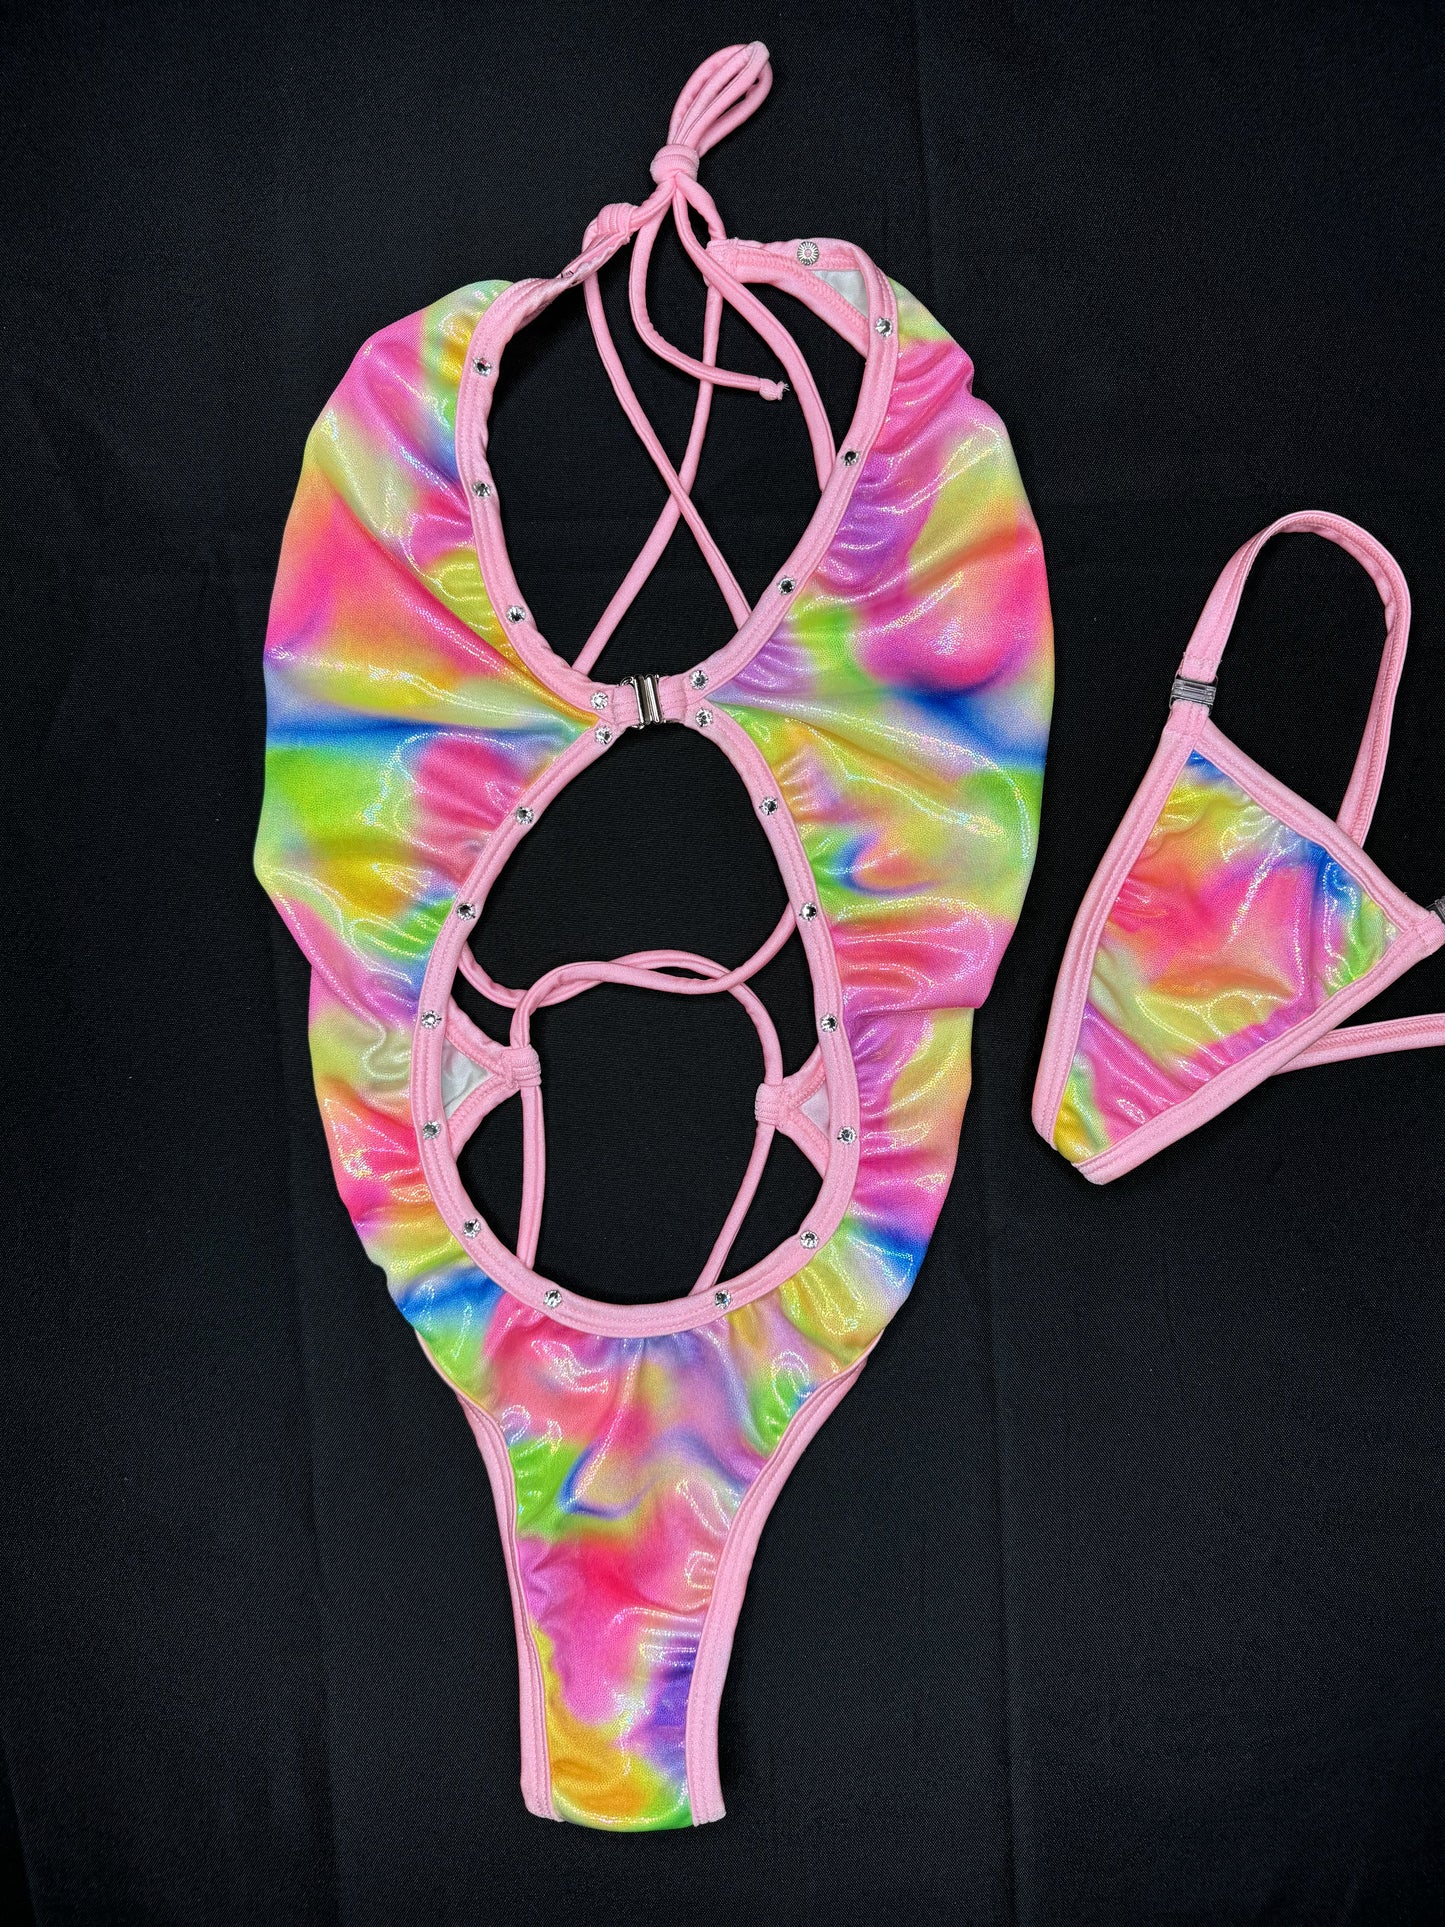 Mystic Rainbow One-Piece Lingerie Outfit